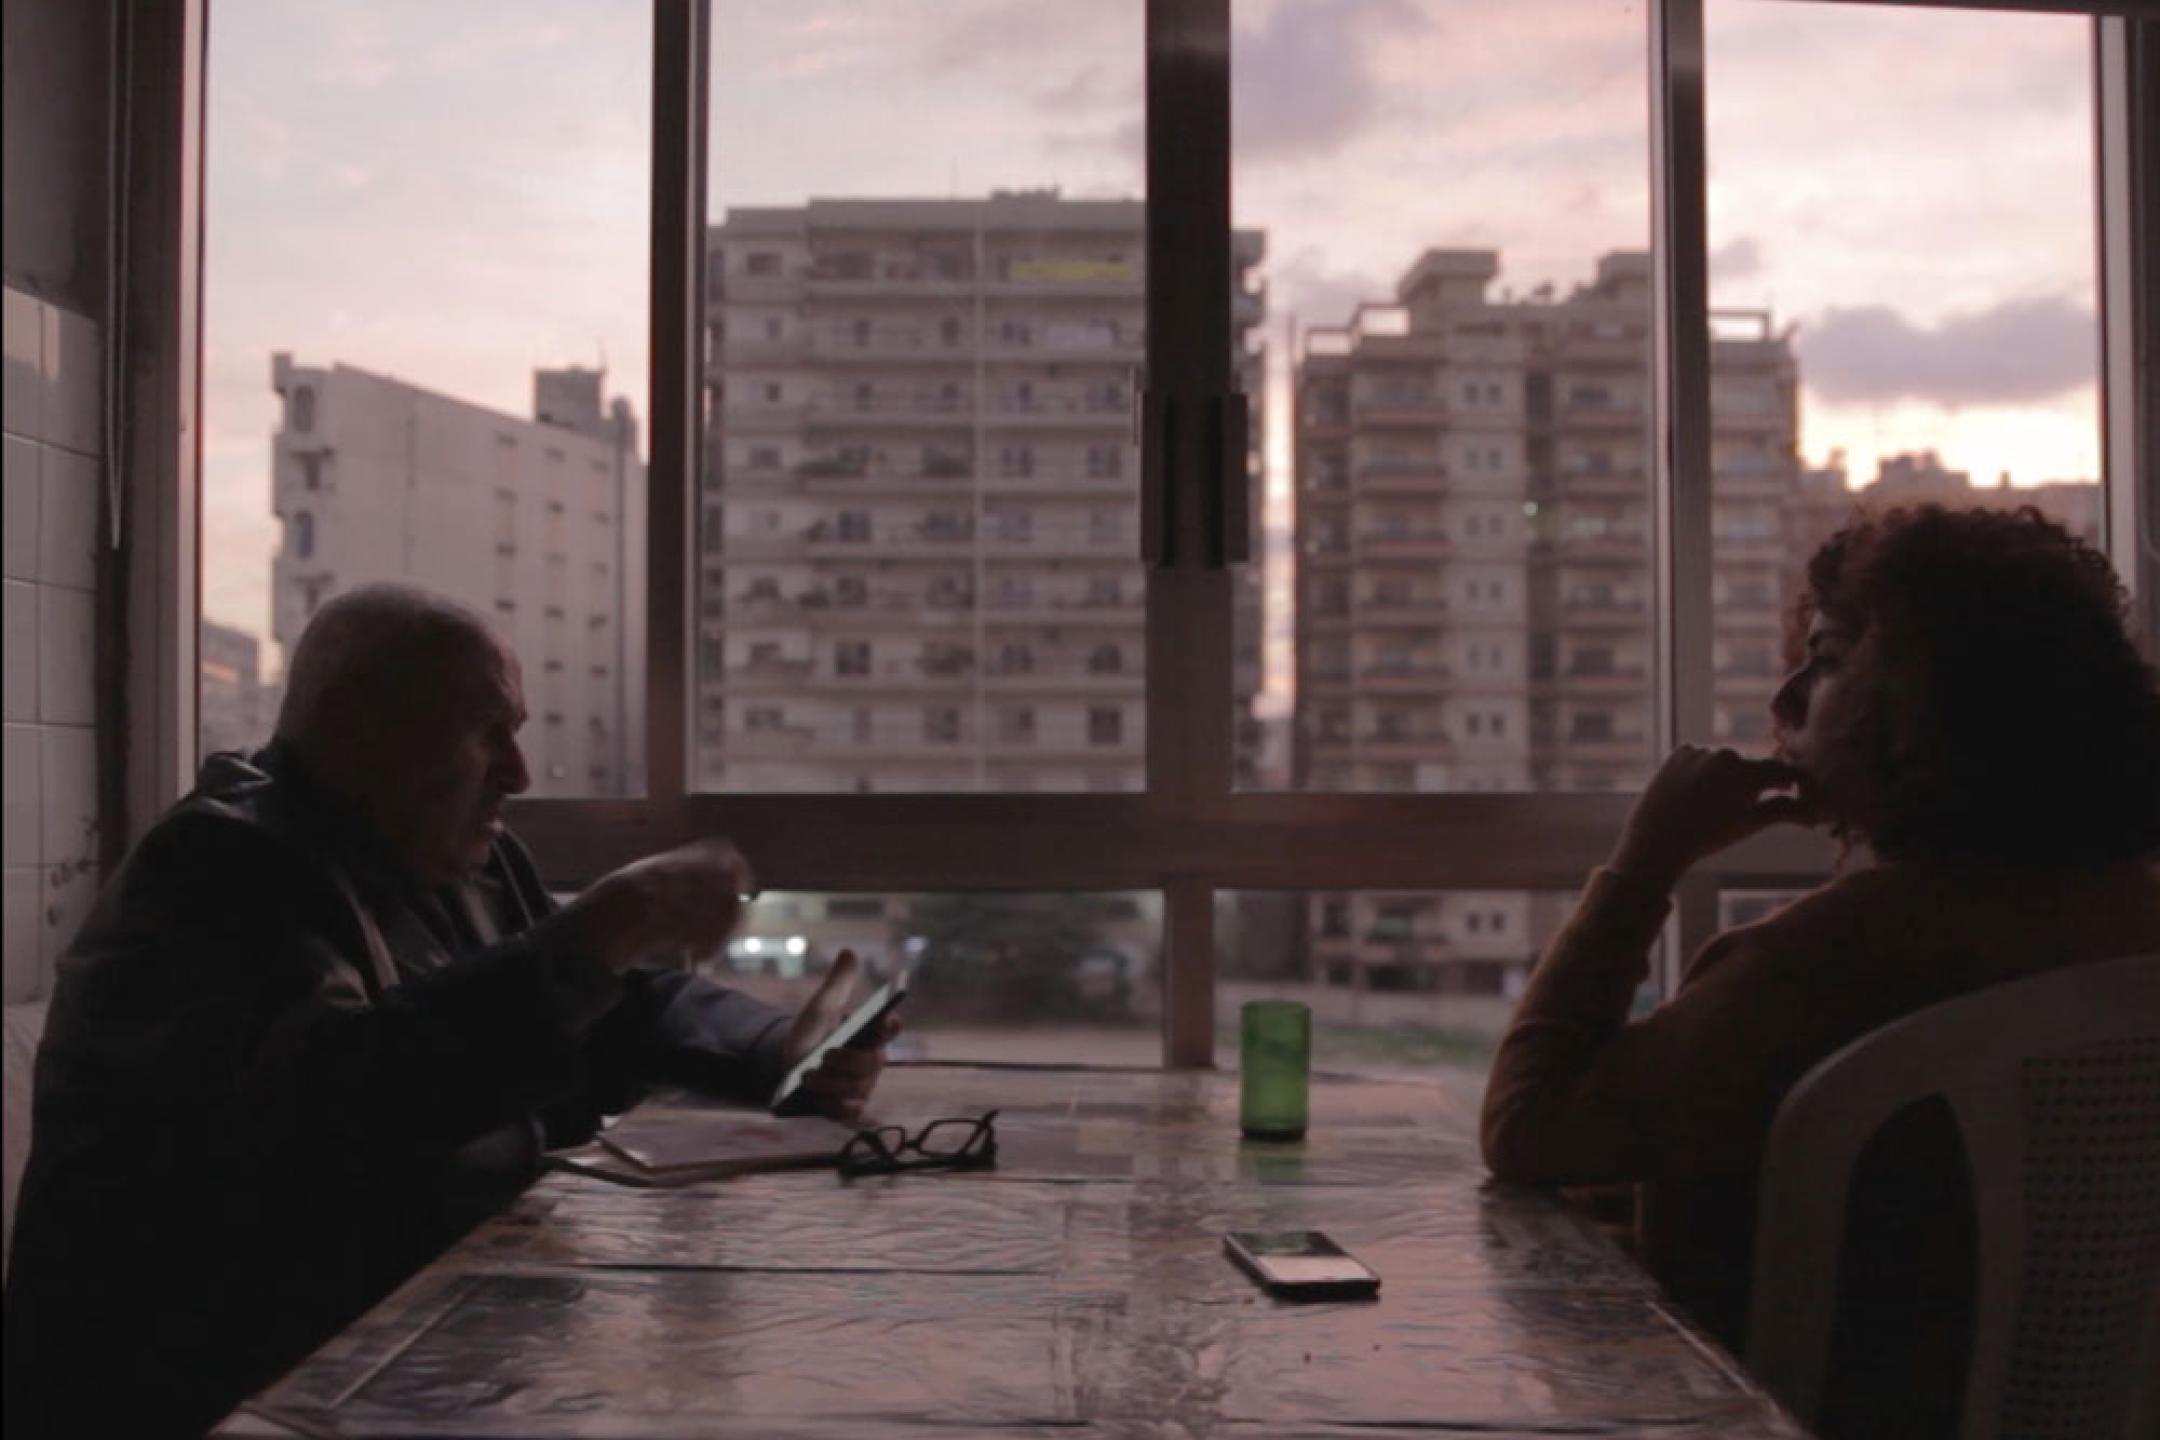 A man and a woman sit opposite to each other at a table at a window. The view shows several residential blocks.